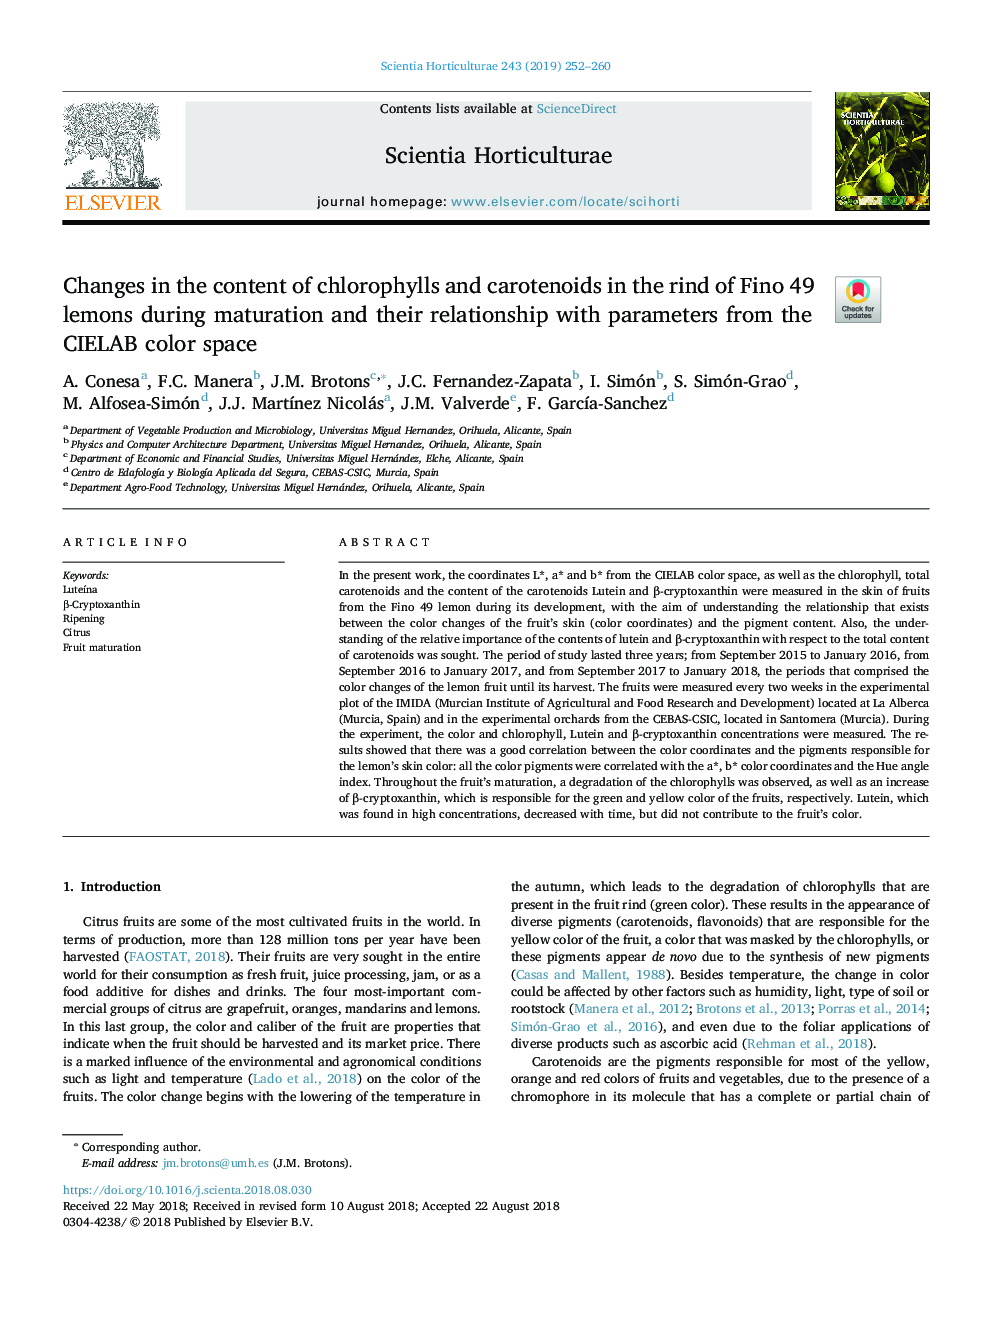 Changes in the content of chlorophylls and carotenoids in the rind of Fino 49 lemons during maturation and their relationship with parameters from the CIELAB color space